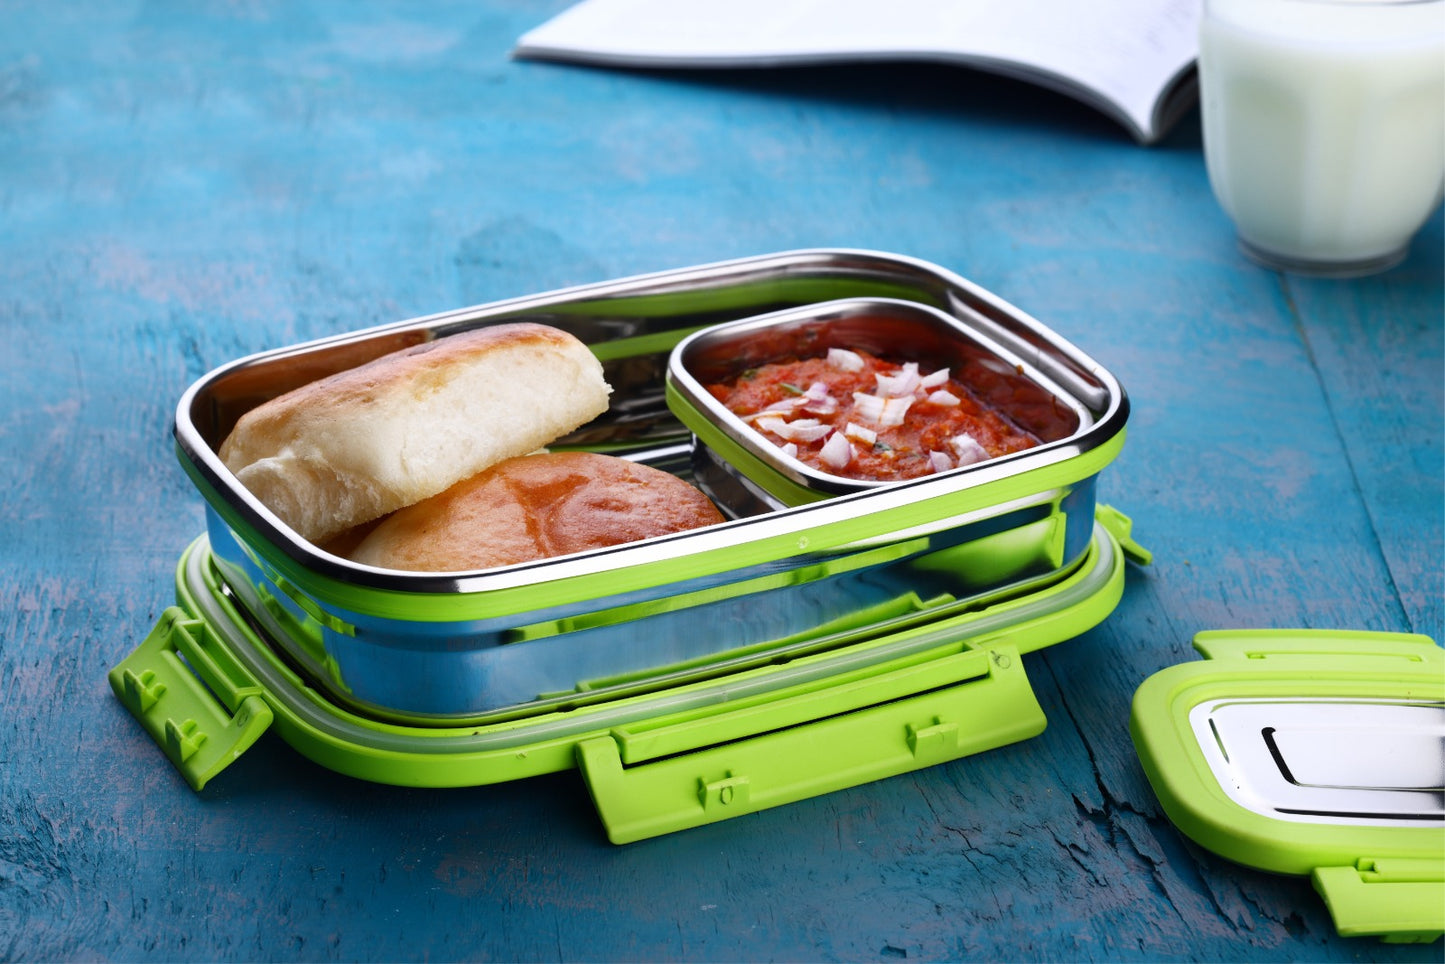 Rectangle Lunch Box